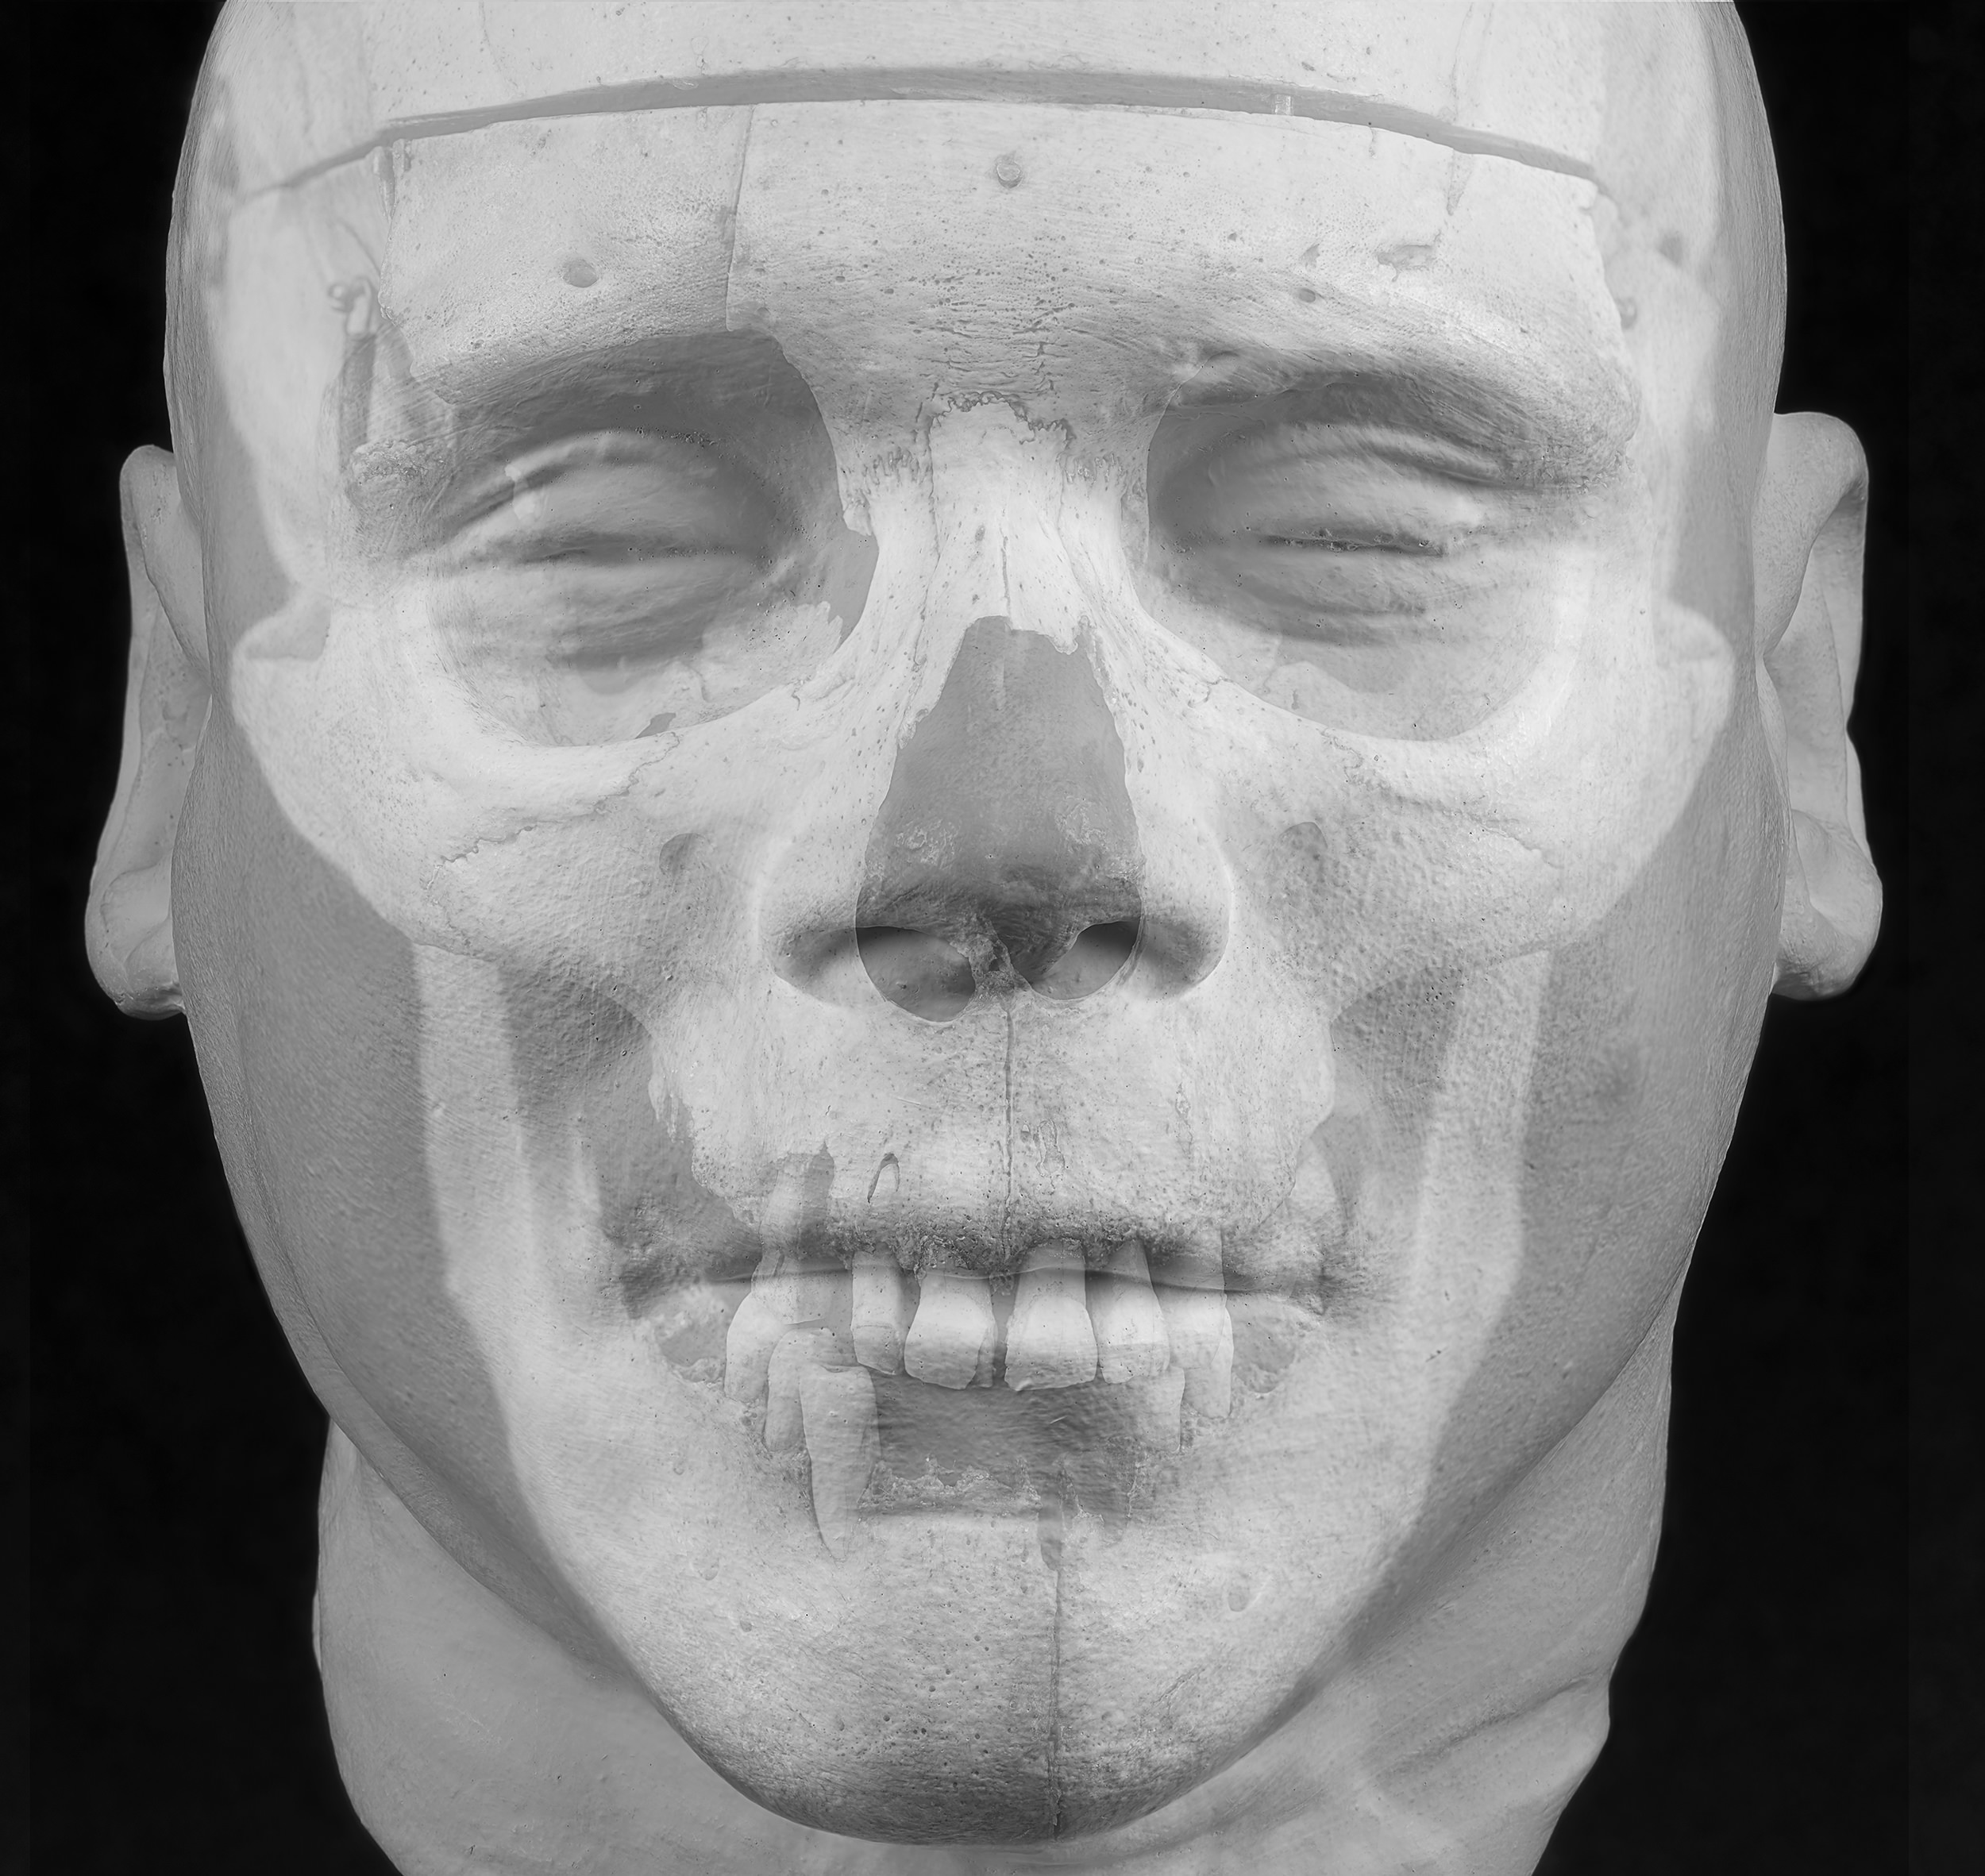 Black and white composite image of the death mask of William Burke, overlayed with the image of his skull, matching up eyes to eye sockets, teeth to mouth etc.